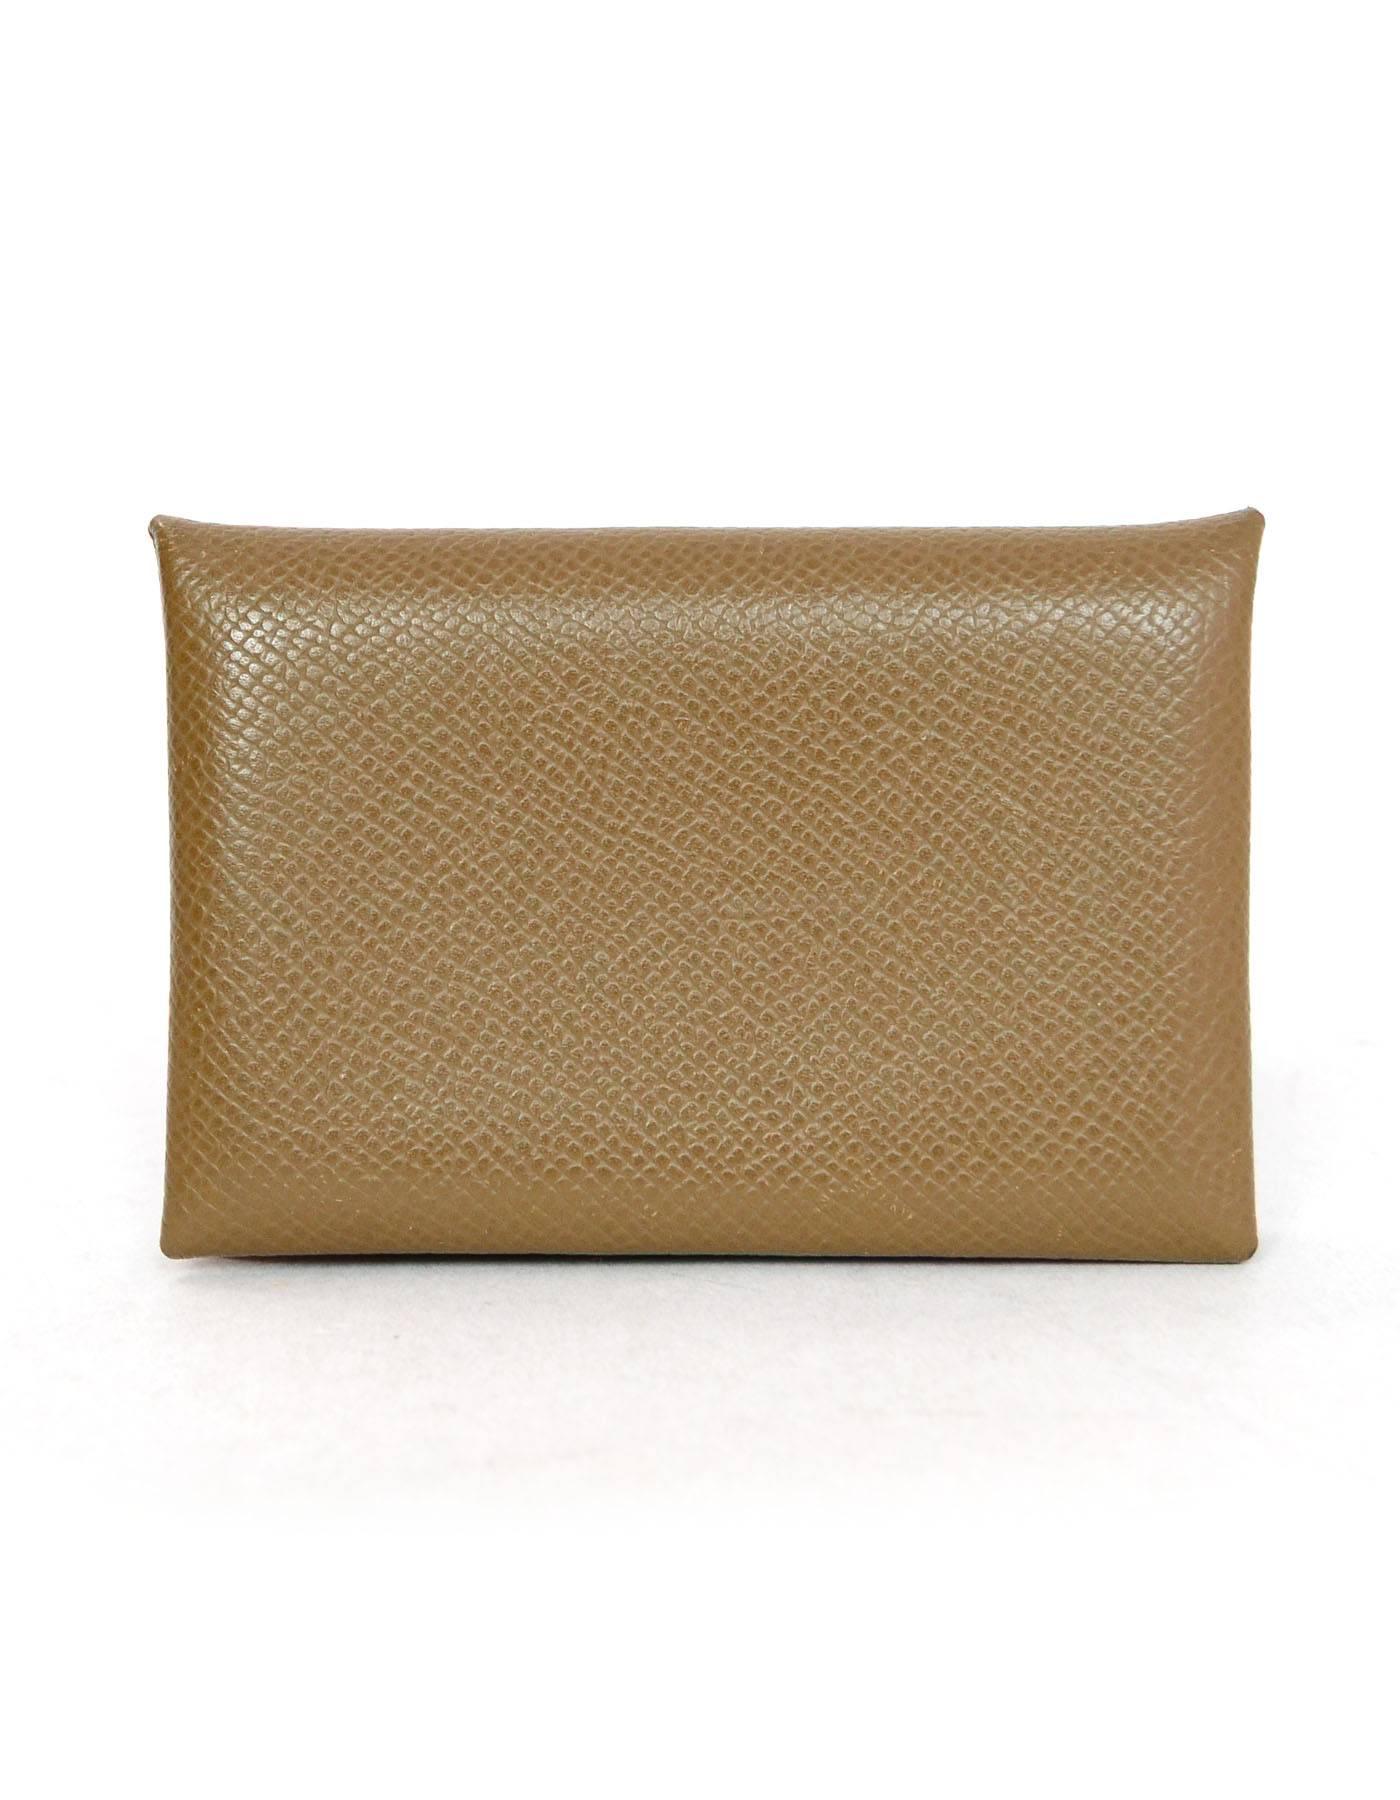 Hermes Taupe Epsom Calfskin Calvi Card Holder

Made In: France
Color: Taupe
Year Of Production: 2009
Materials: Epsom leather
Closure/Opening: Bi-fold with snap
Stamp / Date Code: M in square
Retail Price: $335 + tax
Overall Condition: Excellent